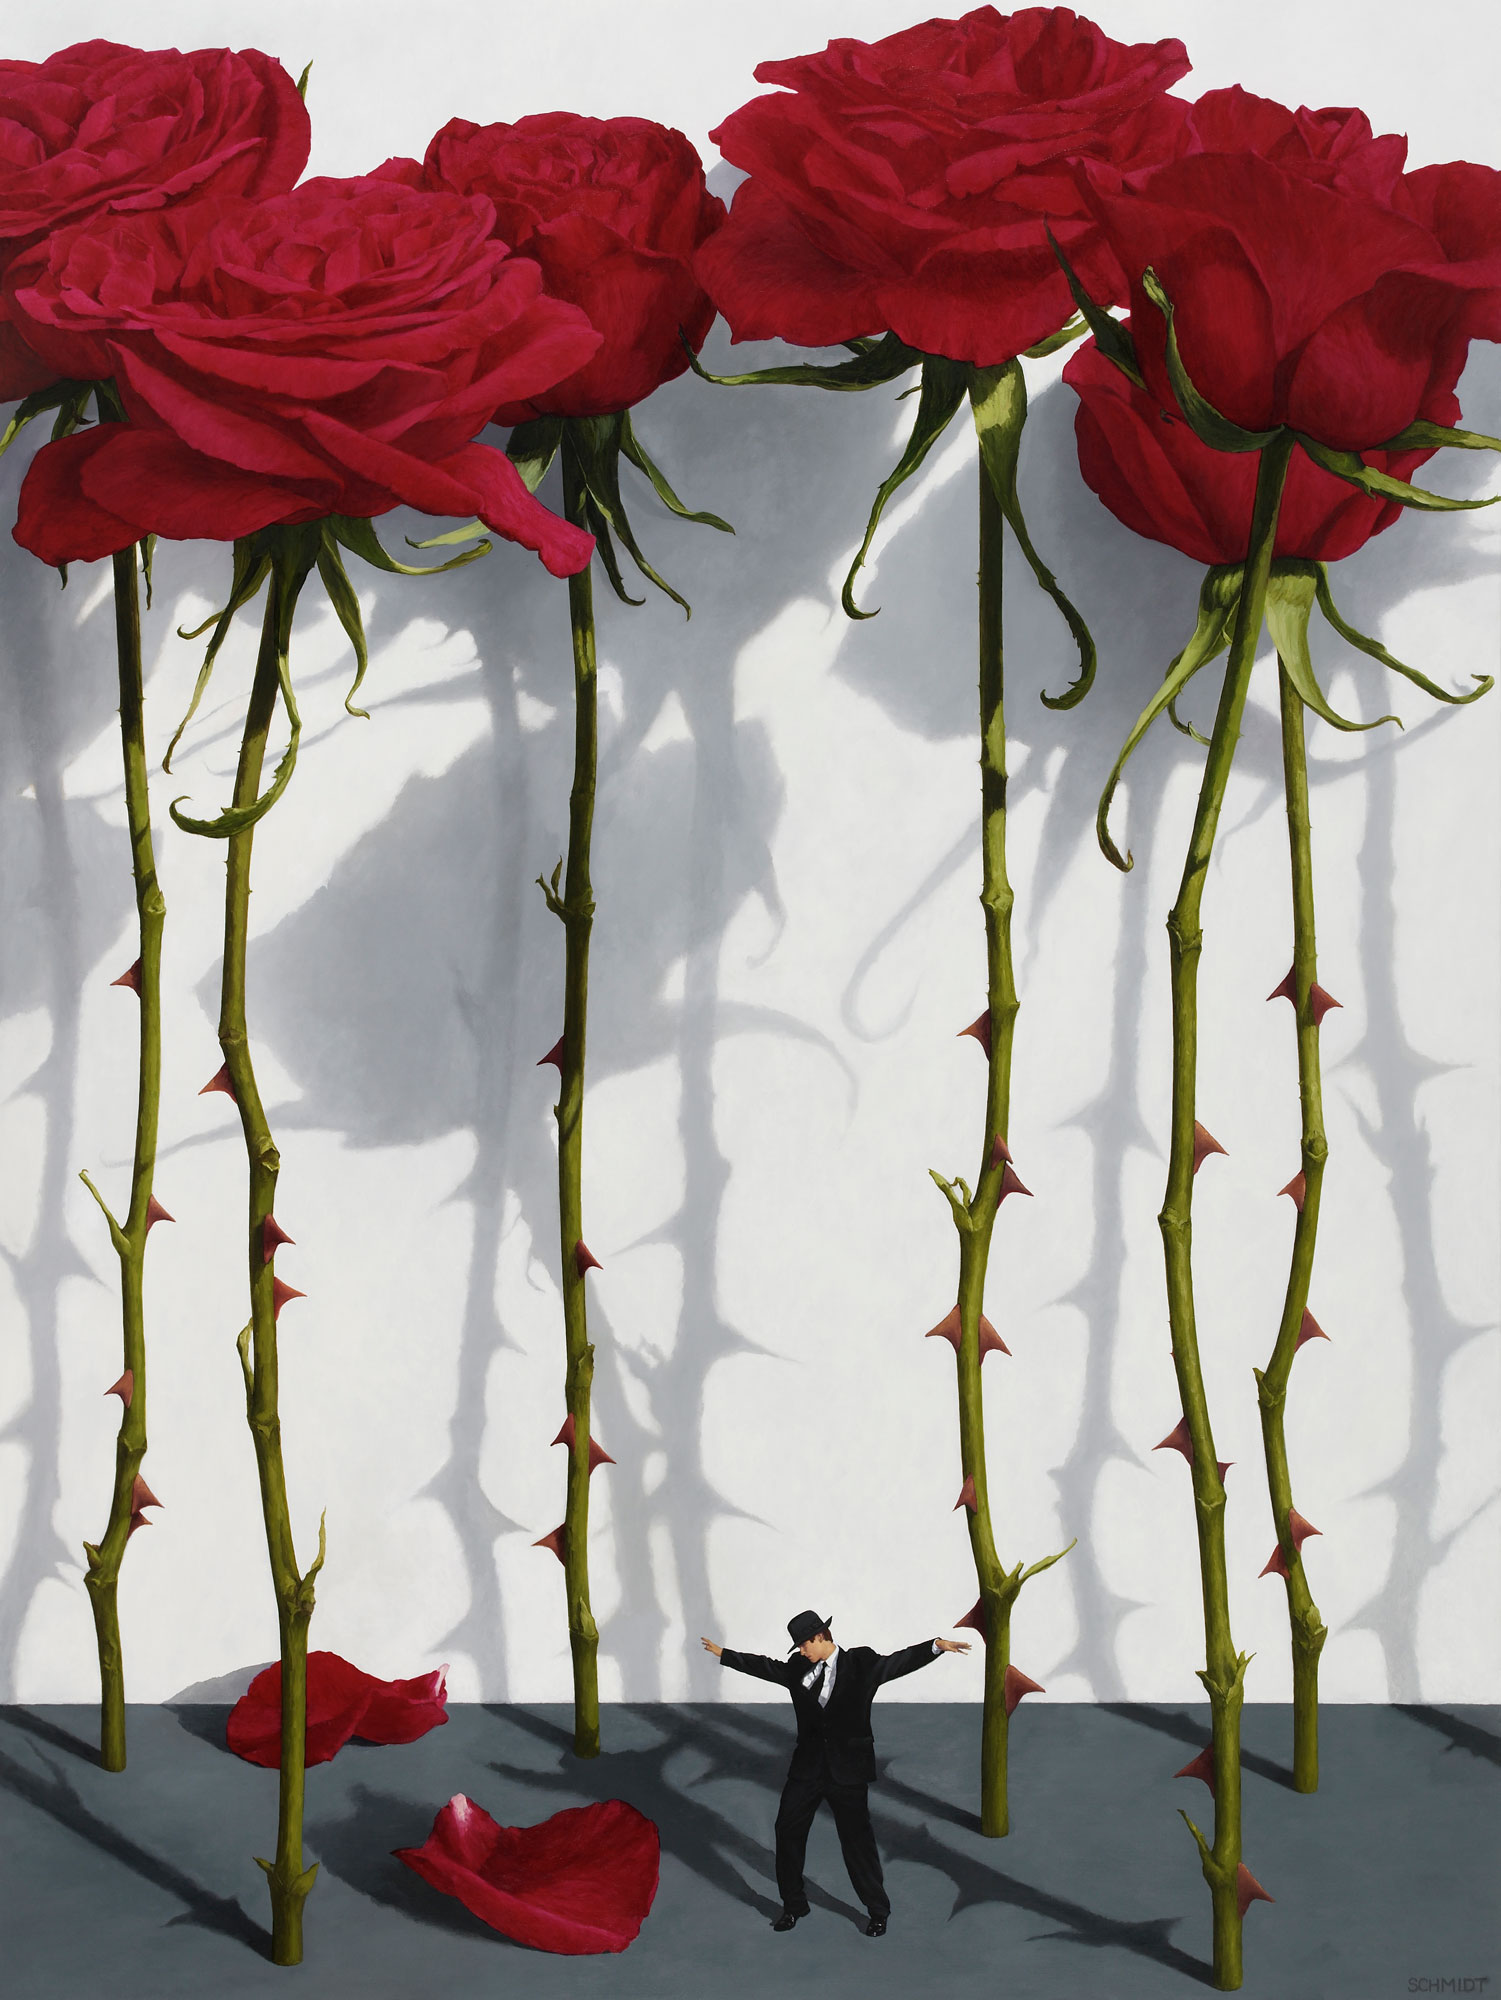 6 red roses standing, stems and thorns, shadow on white wall, red rose petals on floor, diminutive male figure dancing, wearing suit and fedora hat